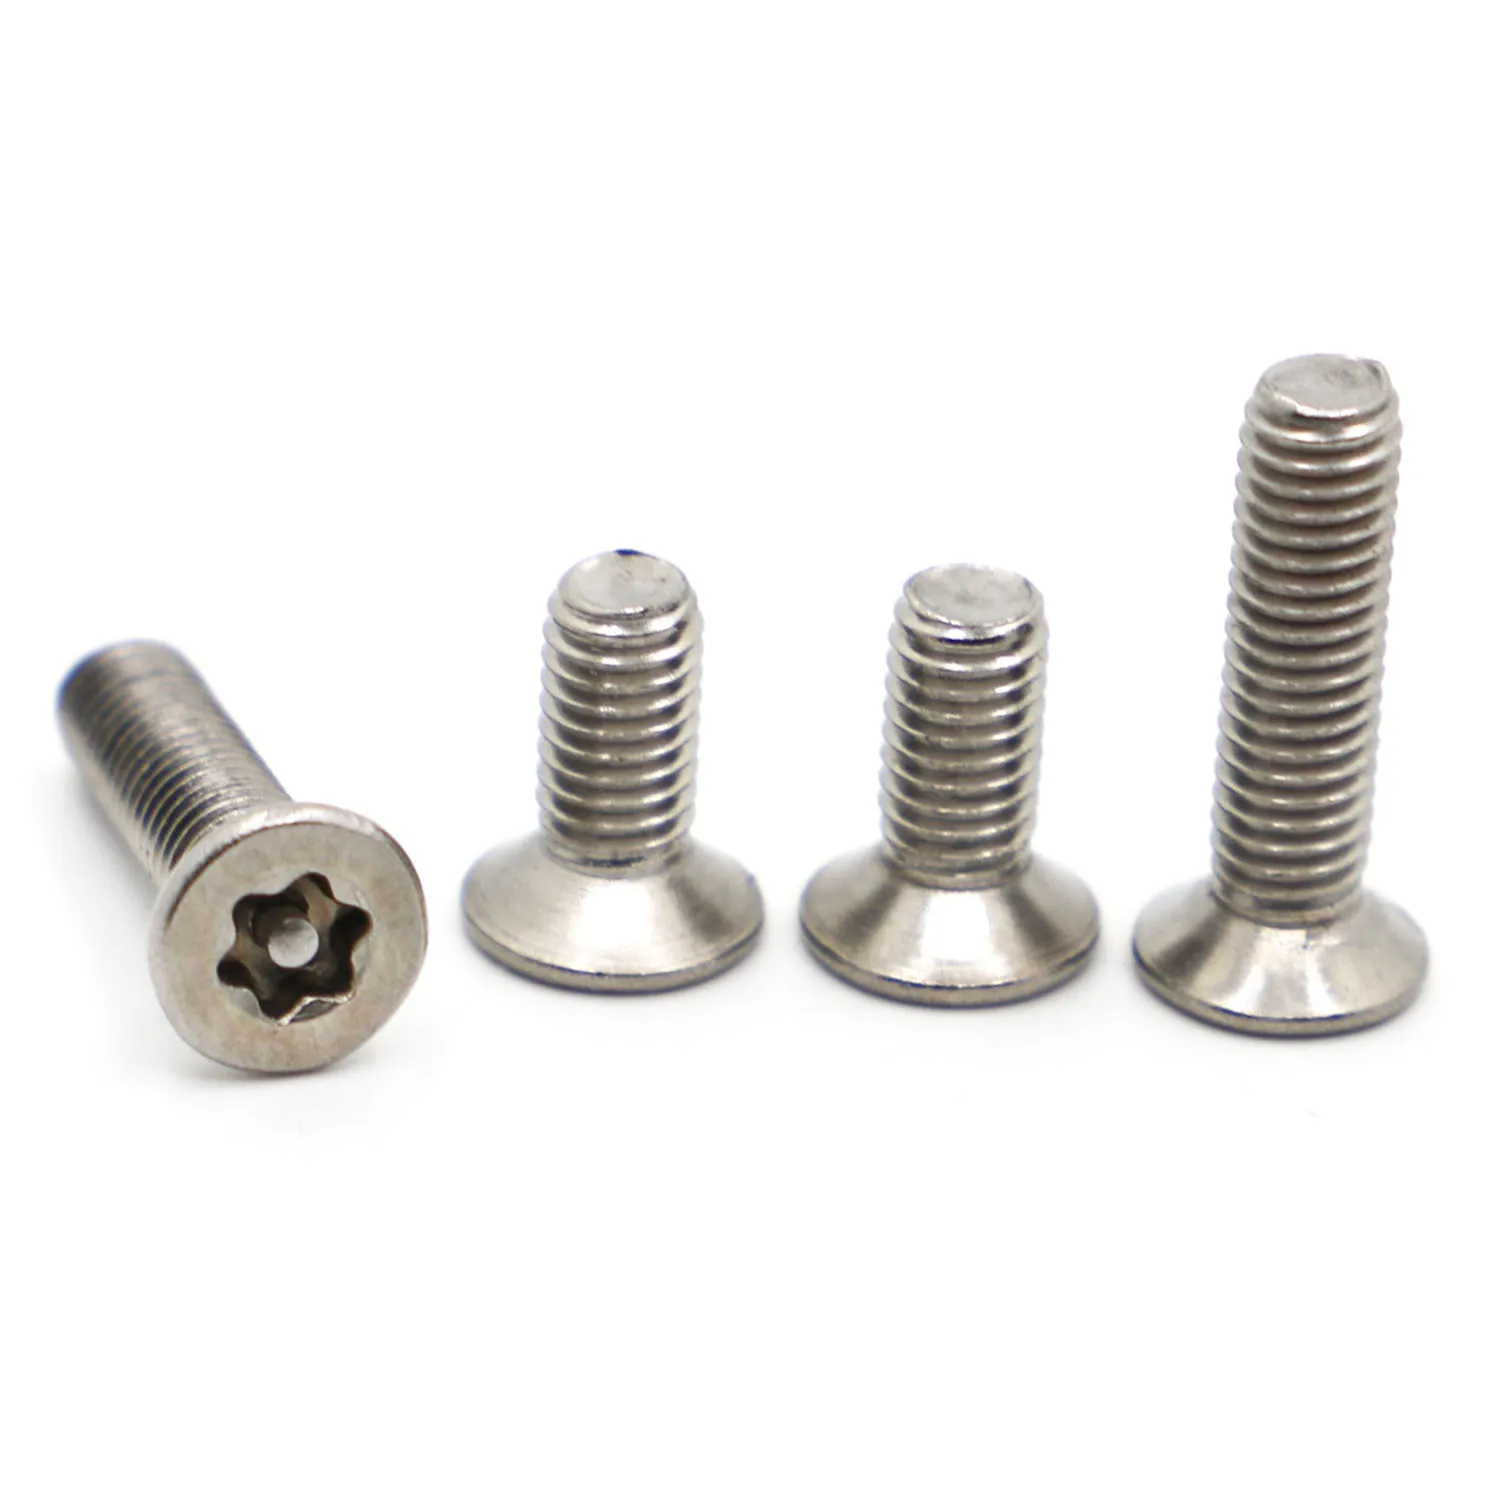 

M2 M2.5 M3 M4 M5 M6 A2 304 Stainless Steel Six Lobe Torx Flat Countersunk Head With Pin Tamper Proof Security Screw Bolt